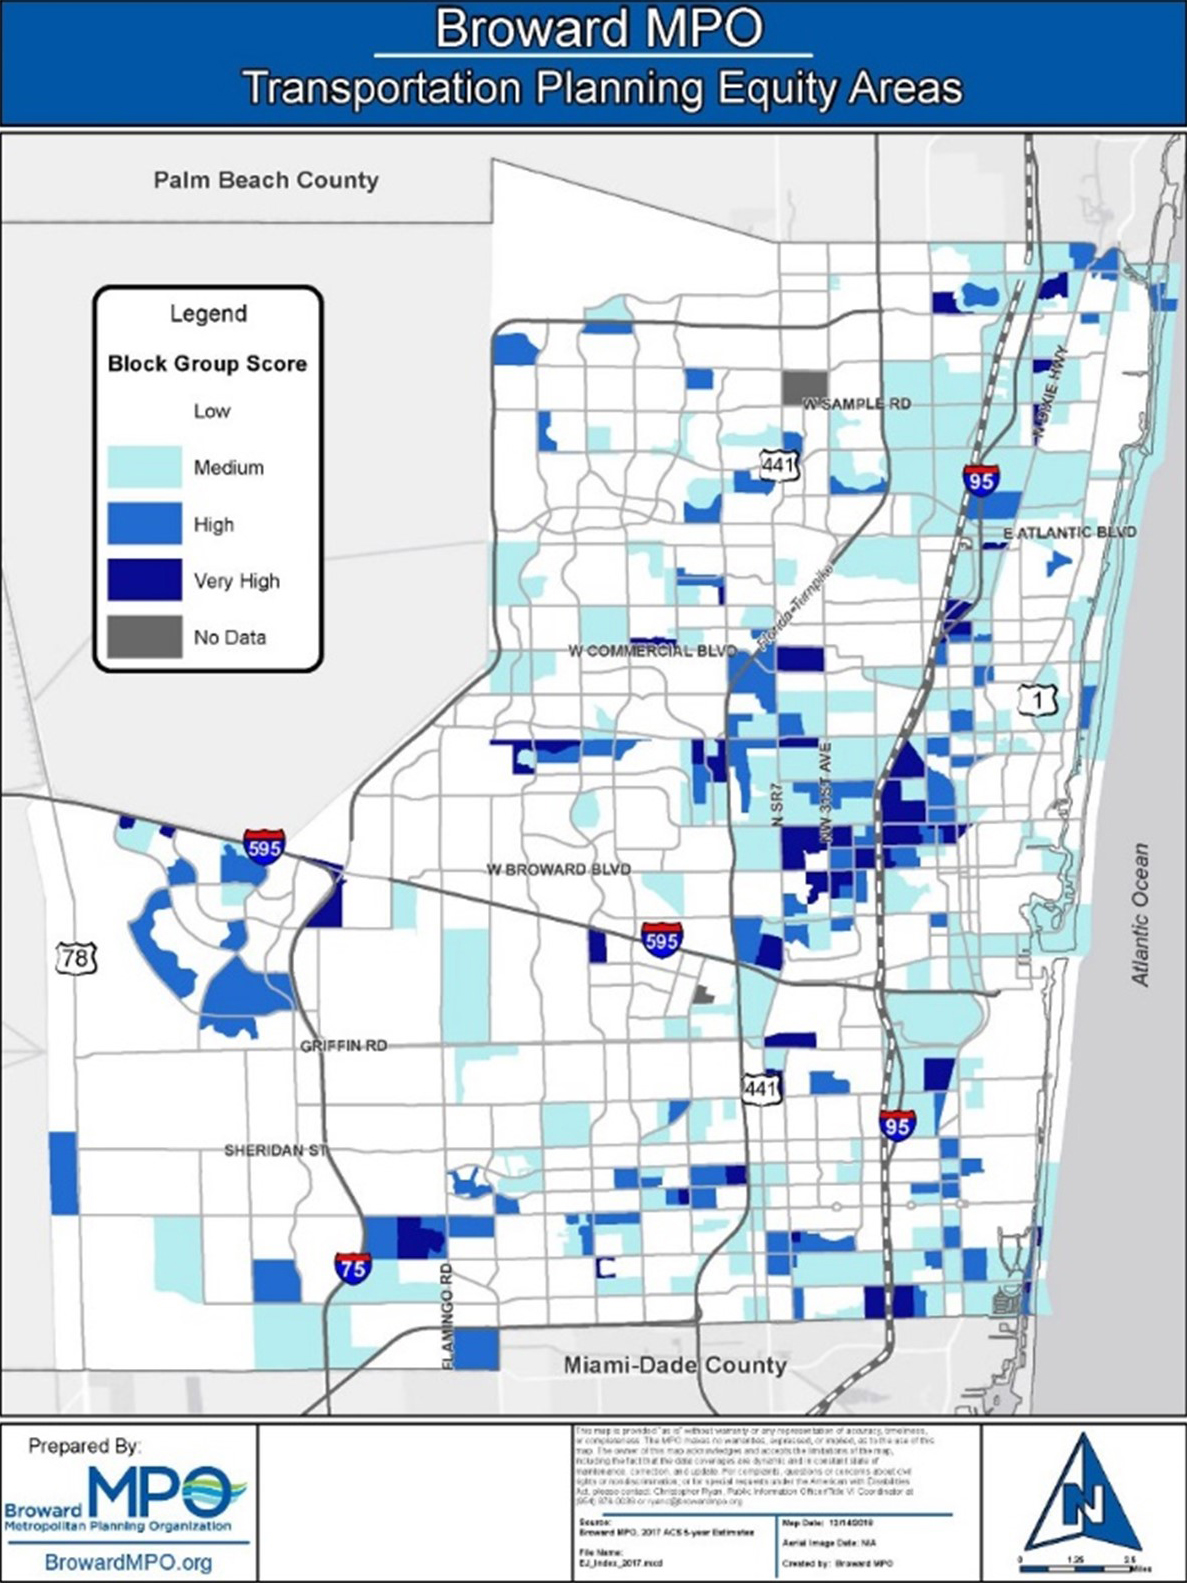 Broward MPO Transportation Planning Equity Areas Map showing the composite scoring for various census block groups in Broward County, Florida based upon the indicators for each block group.